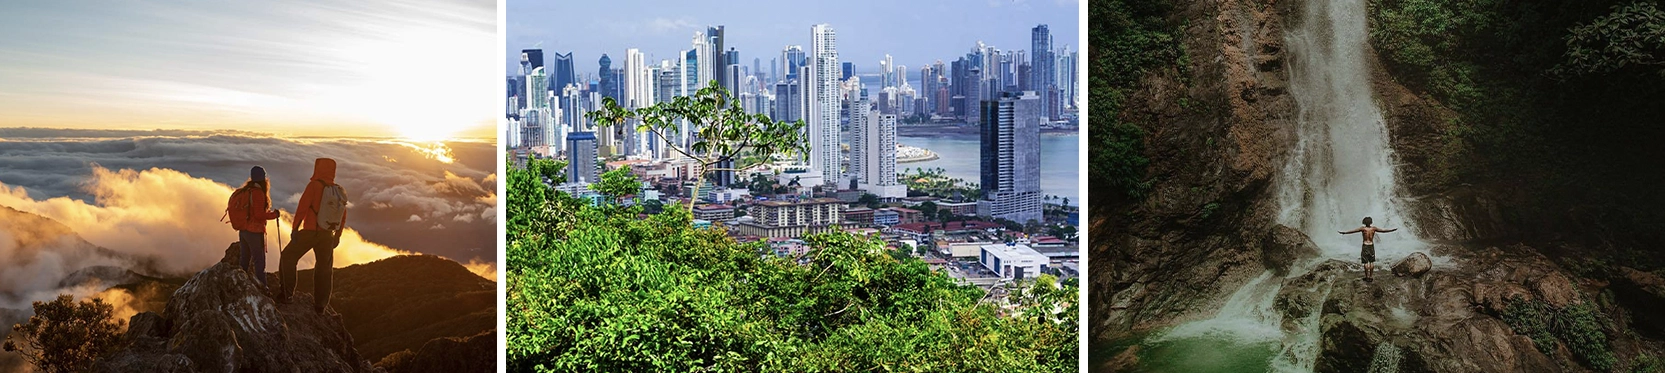 Things to see in Panama